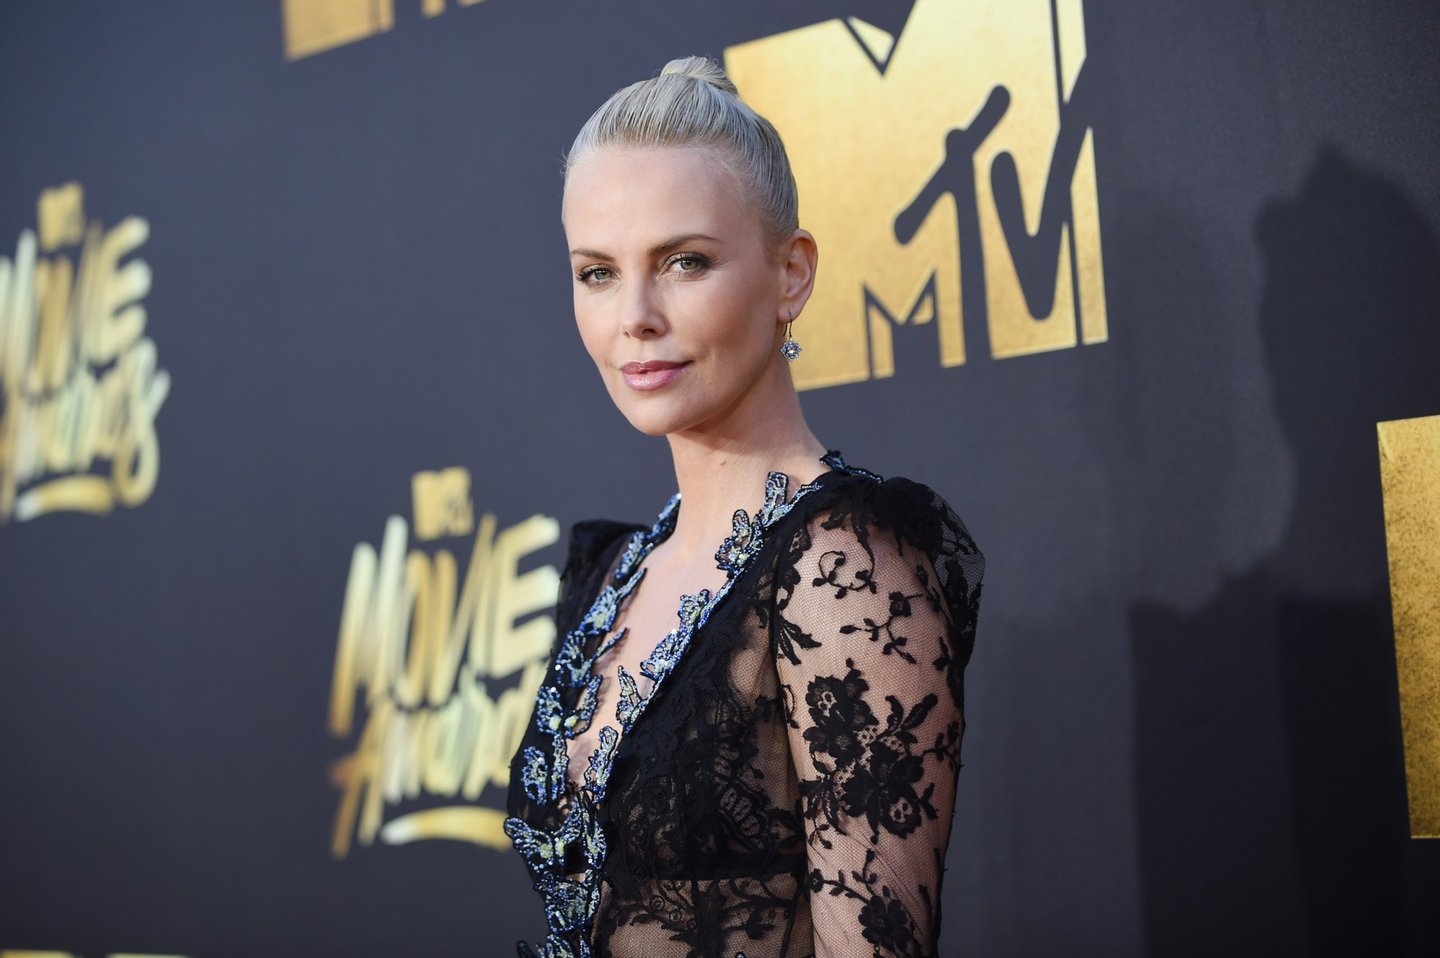 BURBANK, CALIFORNIA - APRIL 09: Actress Charlize Theron attends the 2016 MTV Movie Awards at Warner Bros. Studios on April 9, 2016 in Burbank, California. MTV Movie Awards airs April 10, 2016 at 8pm ET/PT. (Photo by Emma McIntyre/Getty Images for MTV)